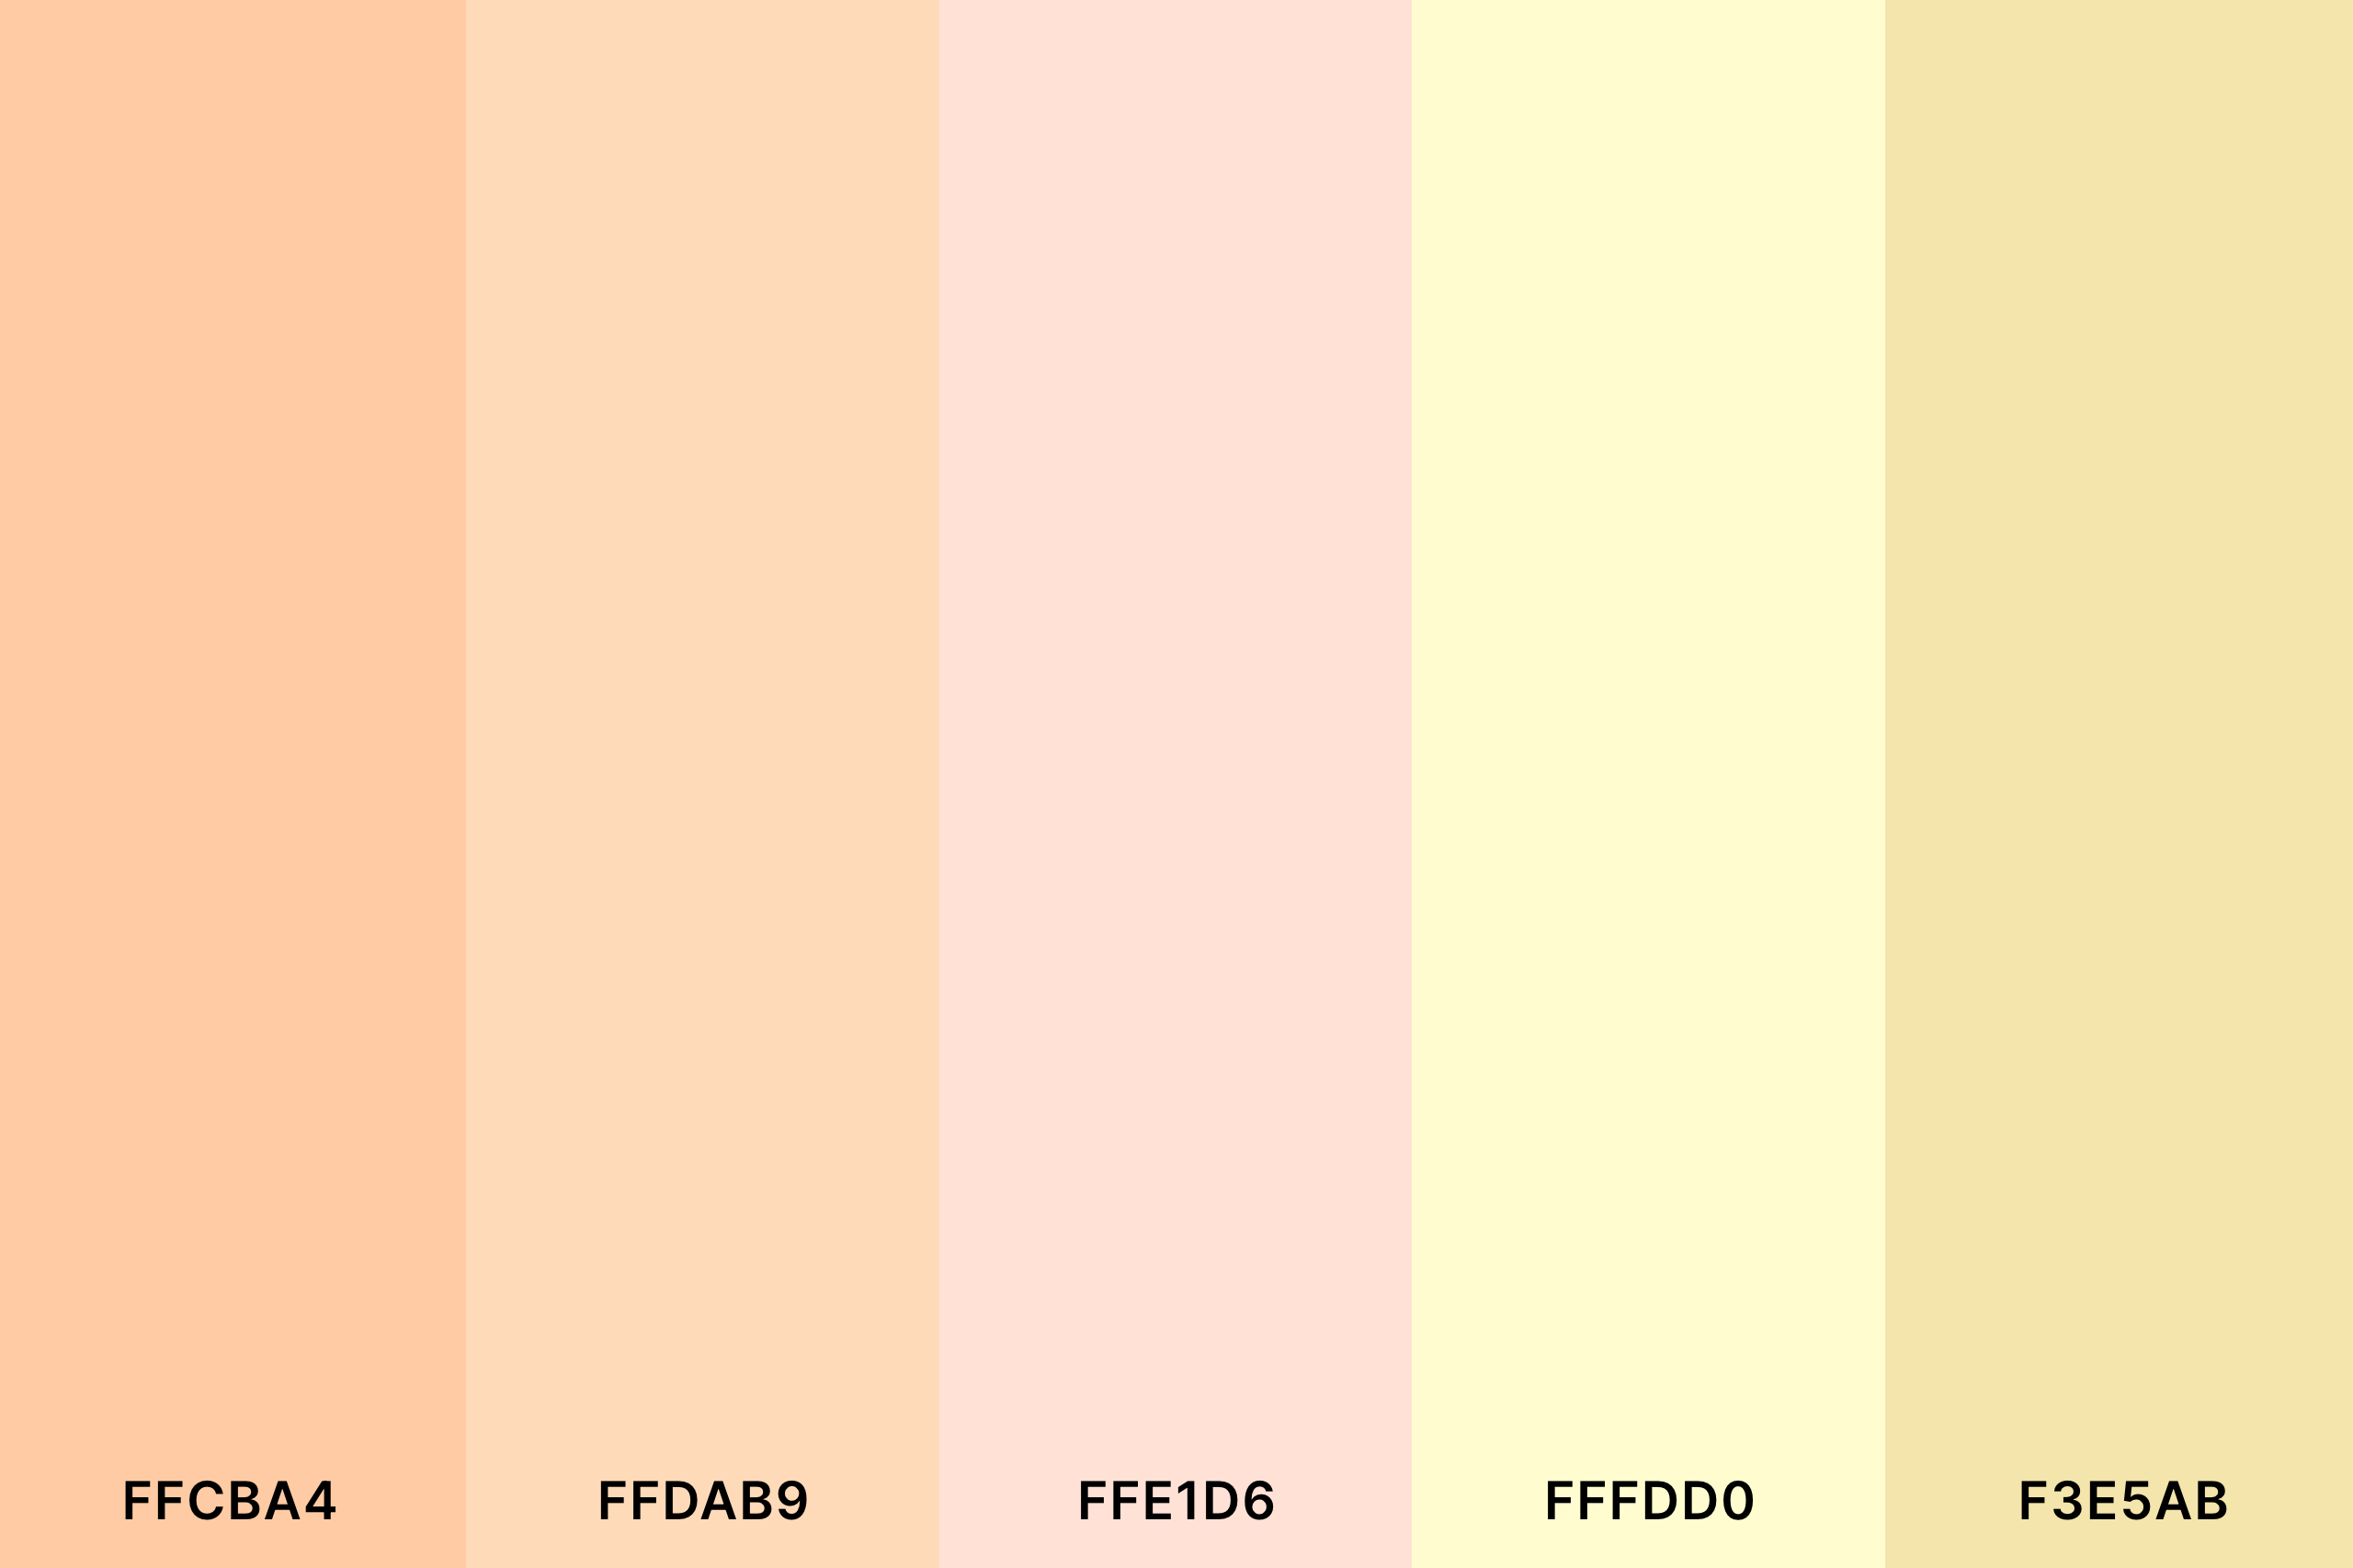 Peach and Cream Color Palette with Peach (Hex #FFCBA4) + Light Orange (Hex #FFDAB9) + Misty Rose (Hex #FFE1D6) + Cream (Hex #FFFDD0) + Vanilla (Hex #F3E5AB) Color Palette with Hex Codes